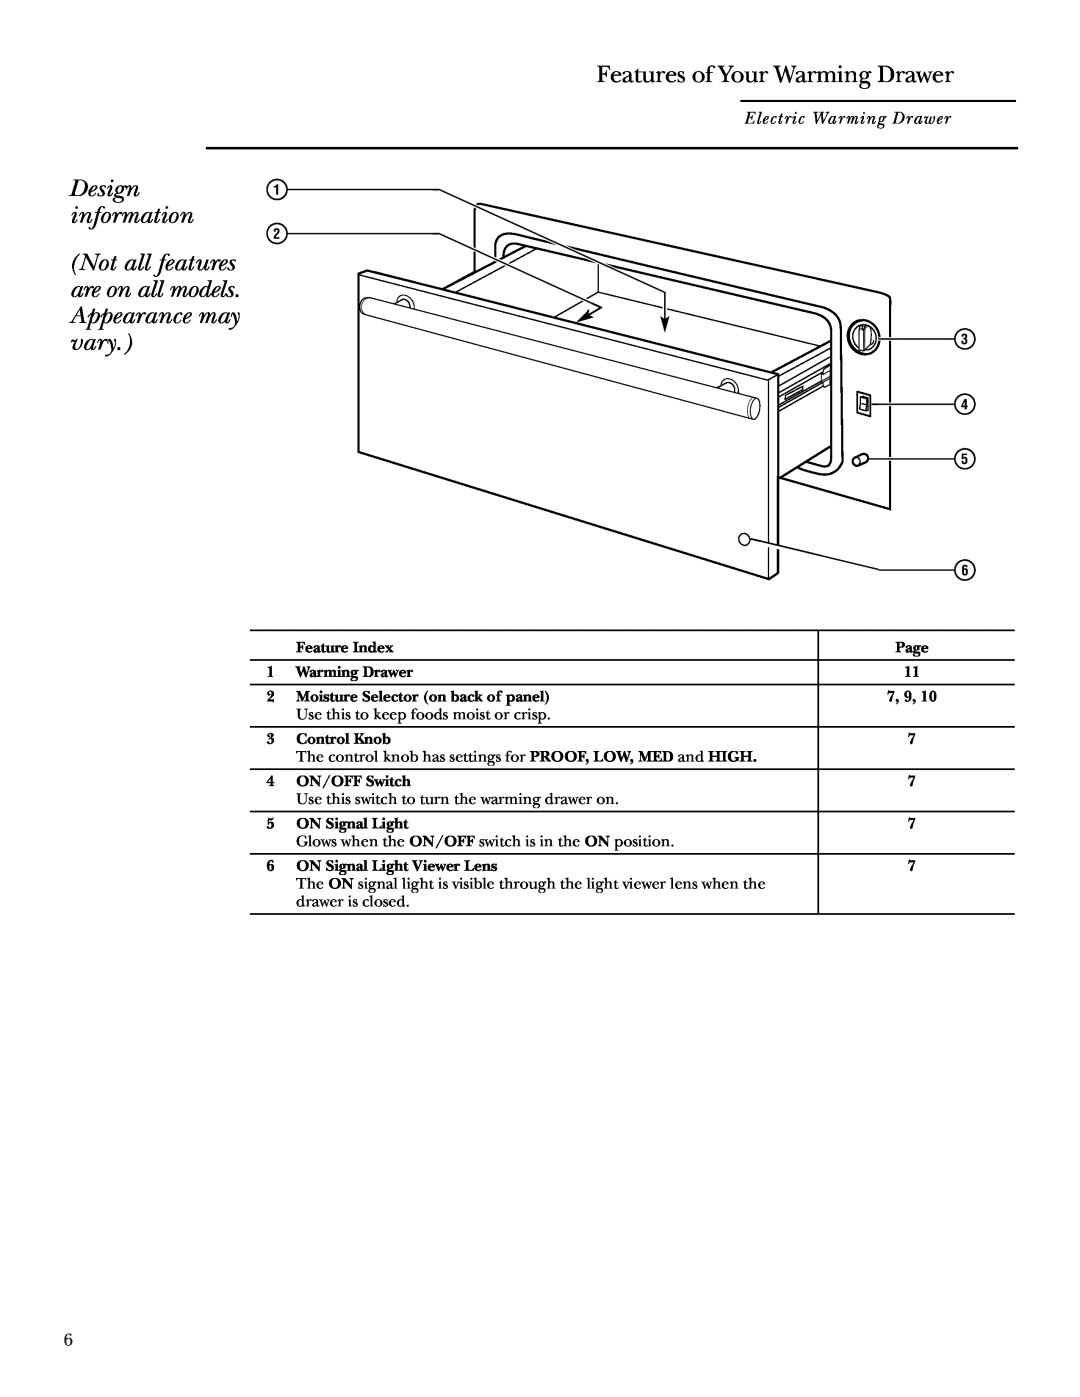 GE ZKD910 owner manual Features of Your Warming Drawer, Design information 